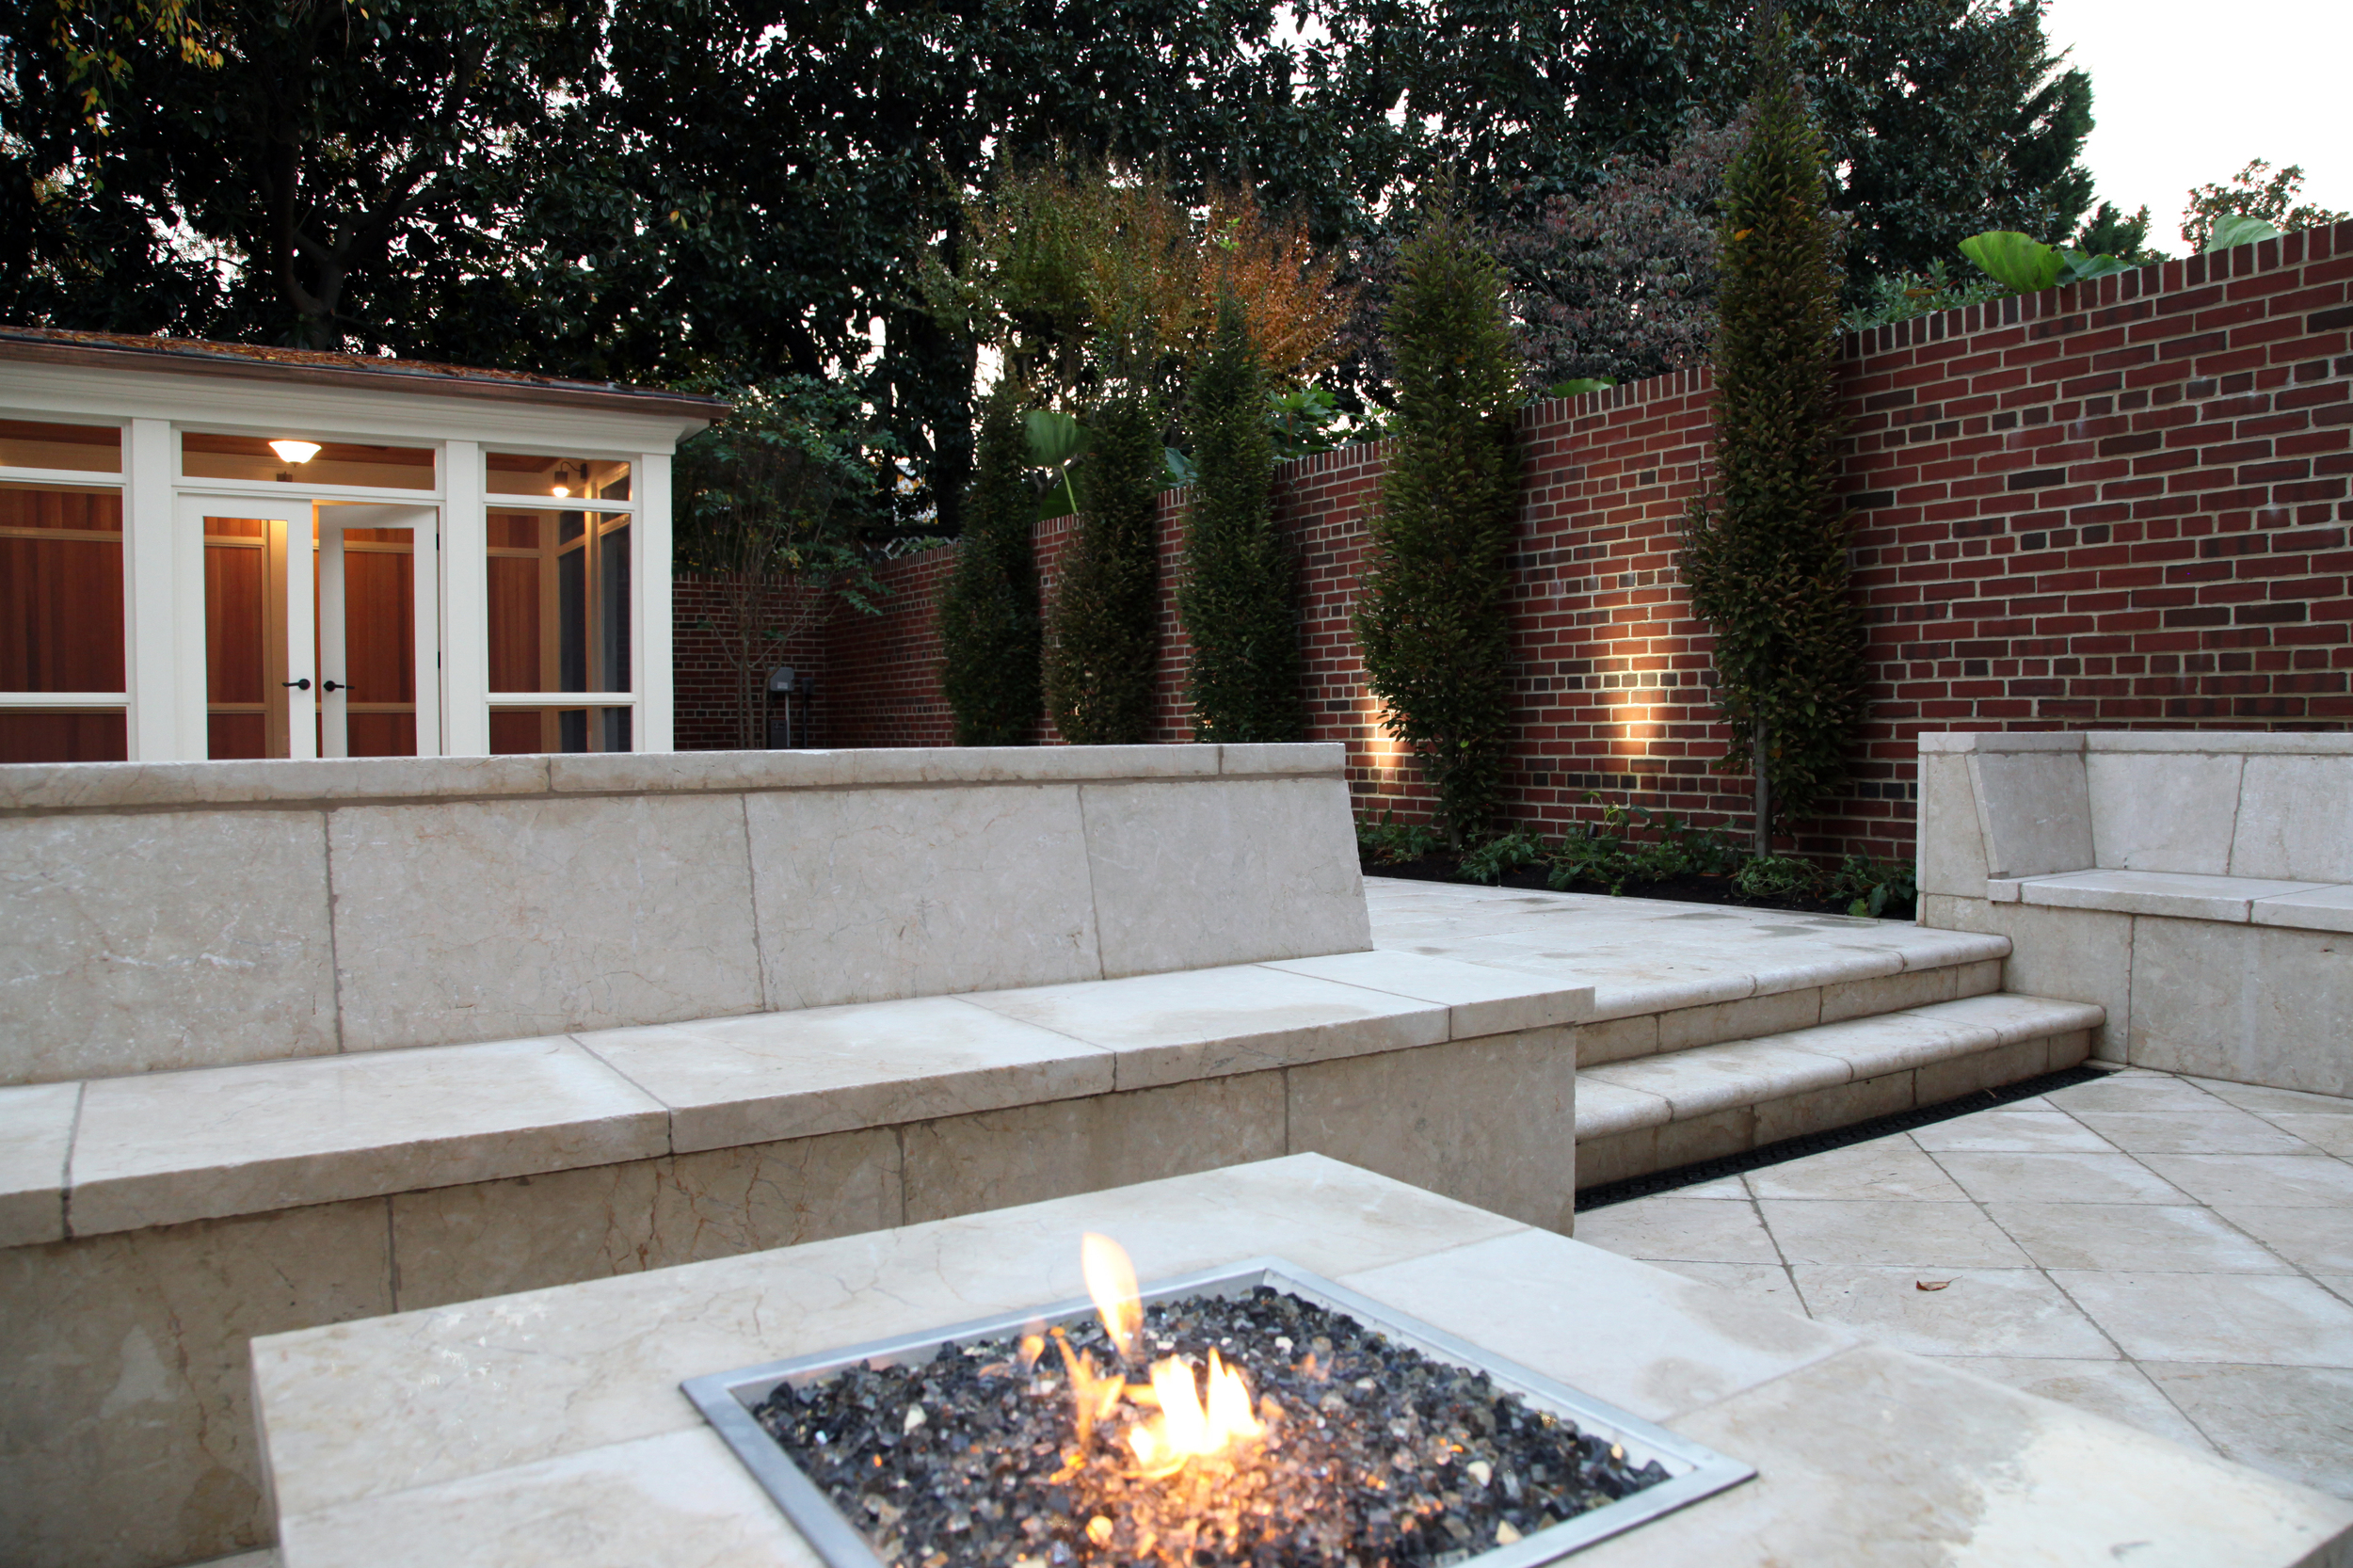   Project Location: &nbsp;Washington, DC (Georgetown)  Completion: &nbsp;Summer 2015  General Contractor: &nbsp;OldeTowne Historic Landscape  Primary Material Palette: &nbsp;Crema Eda marble, brick, cedar, copper  Photos By: &nbsp;Moody Landscape Arc